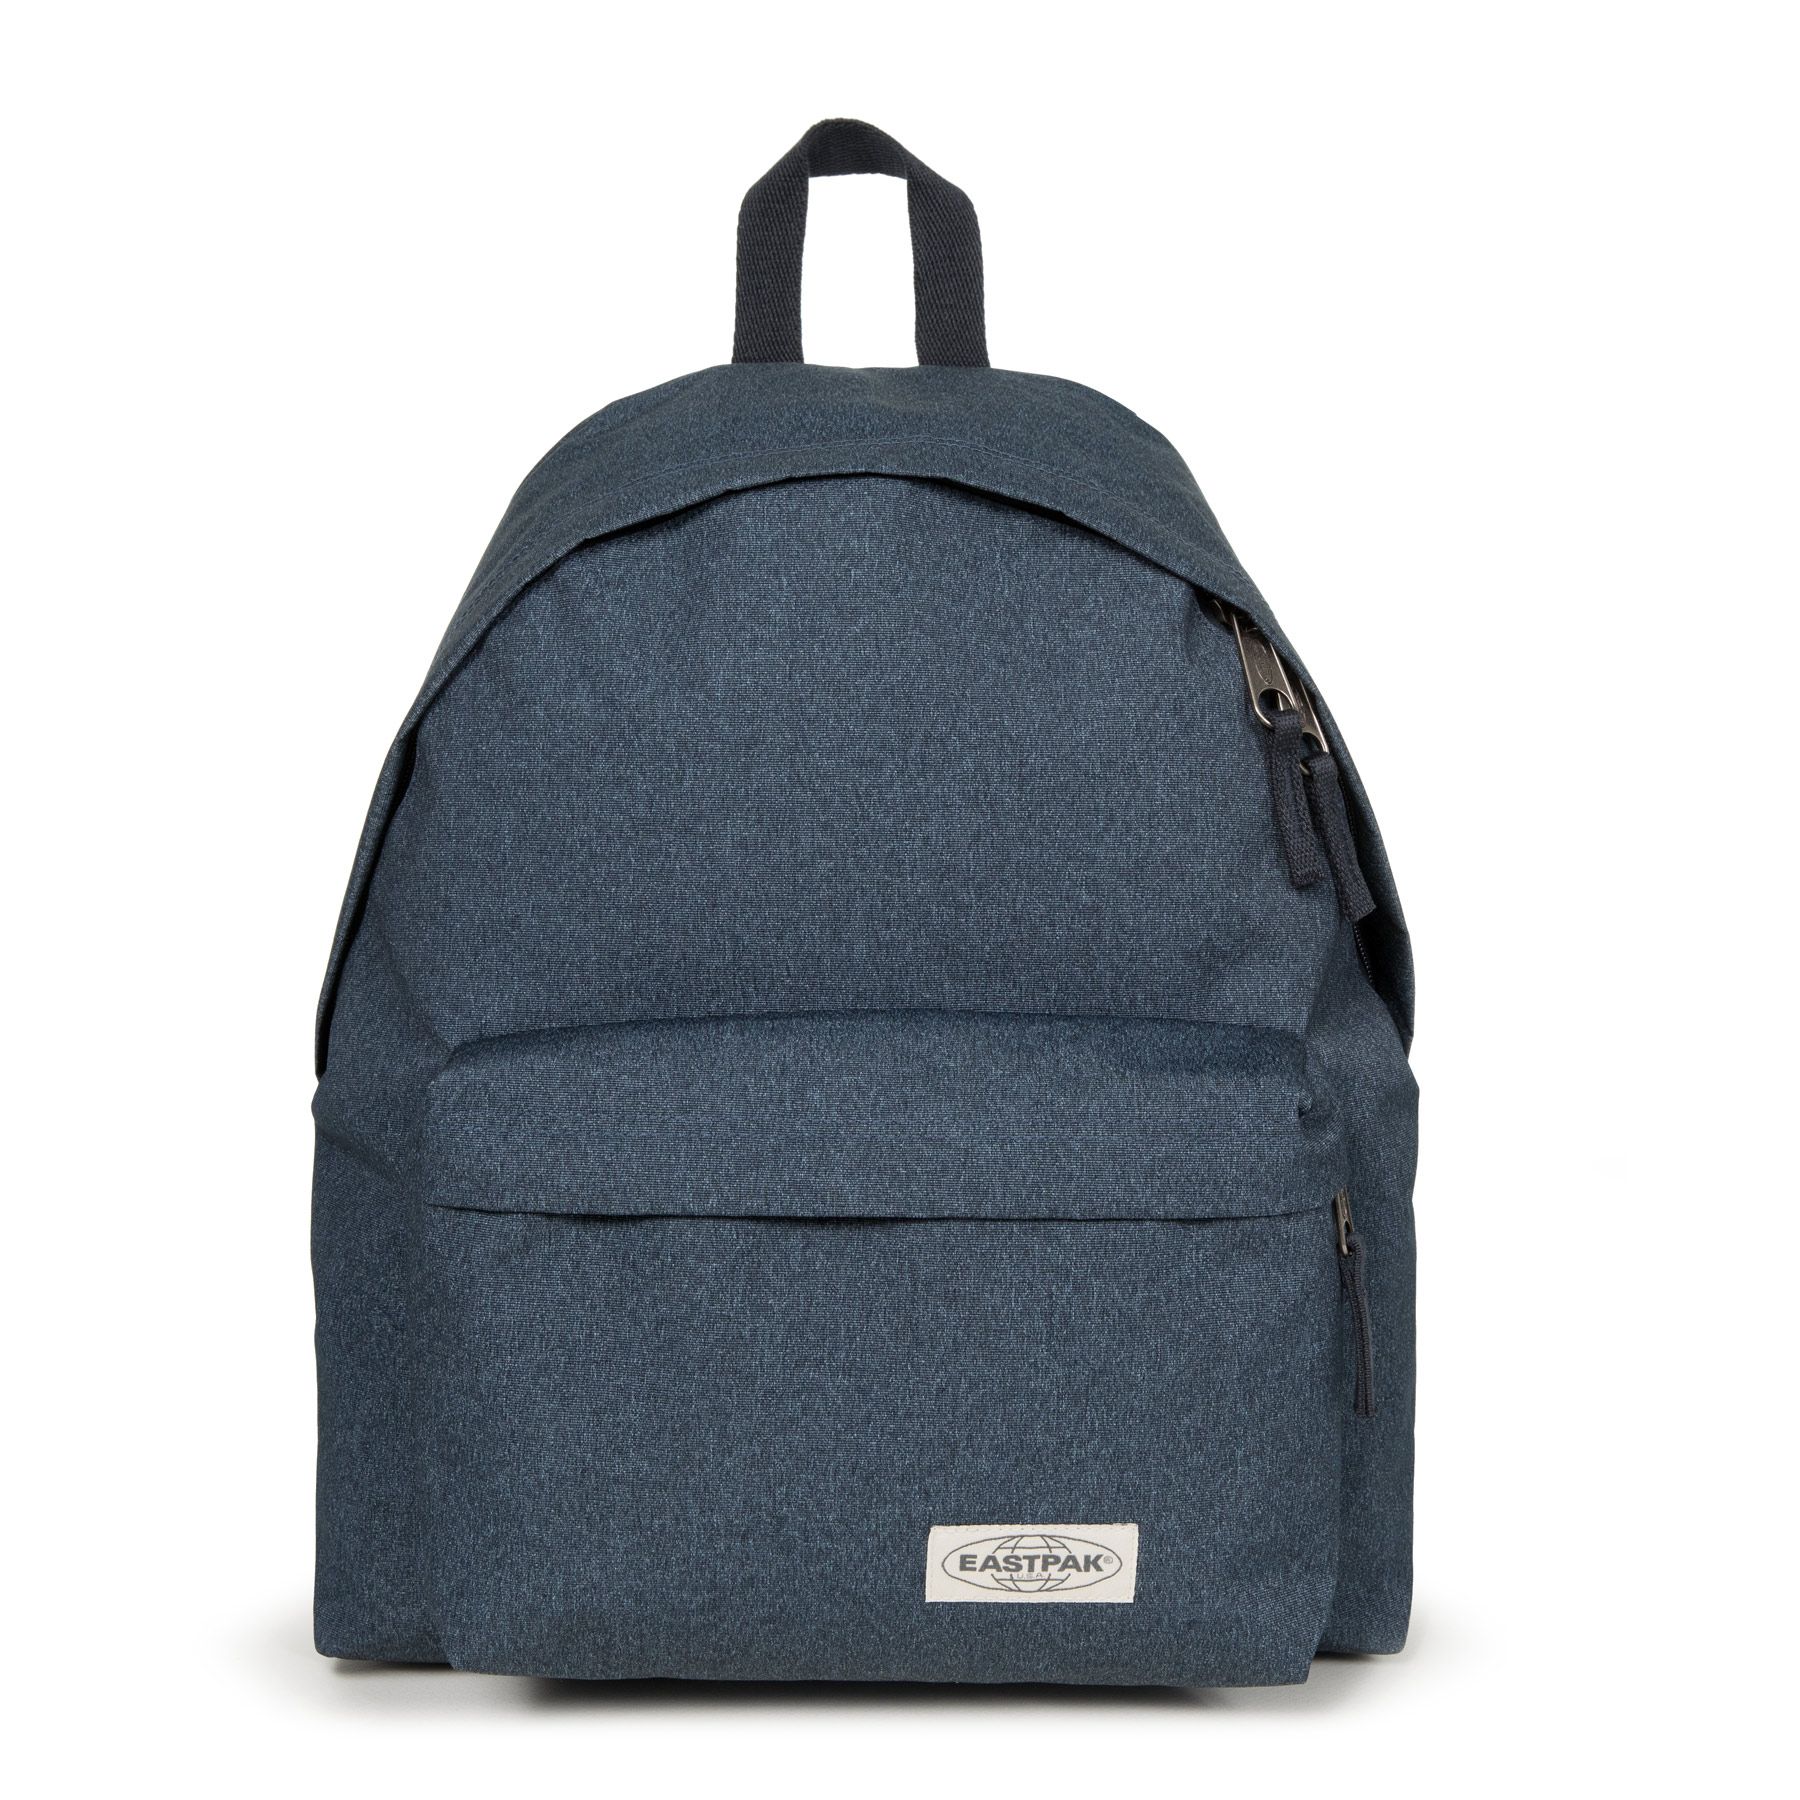 Eastpak unisex sac a dos padded pak r 24l muted blue muted blue os